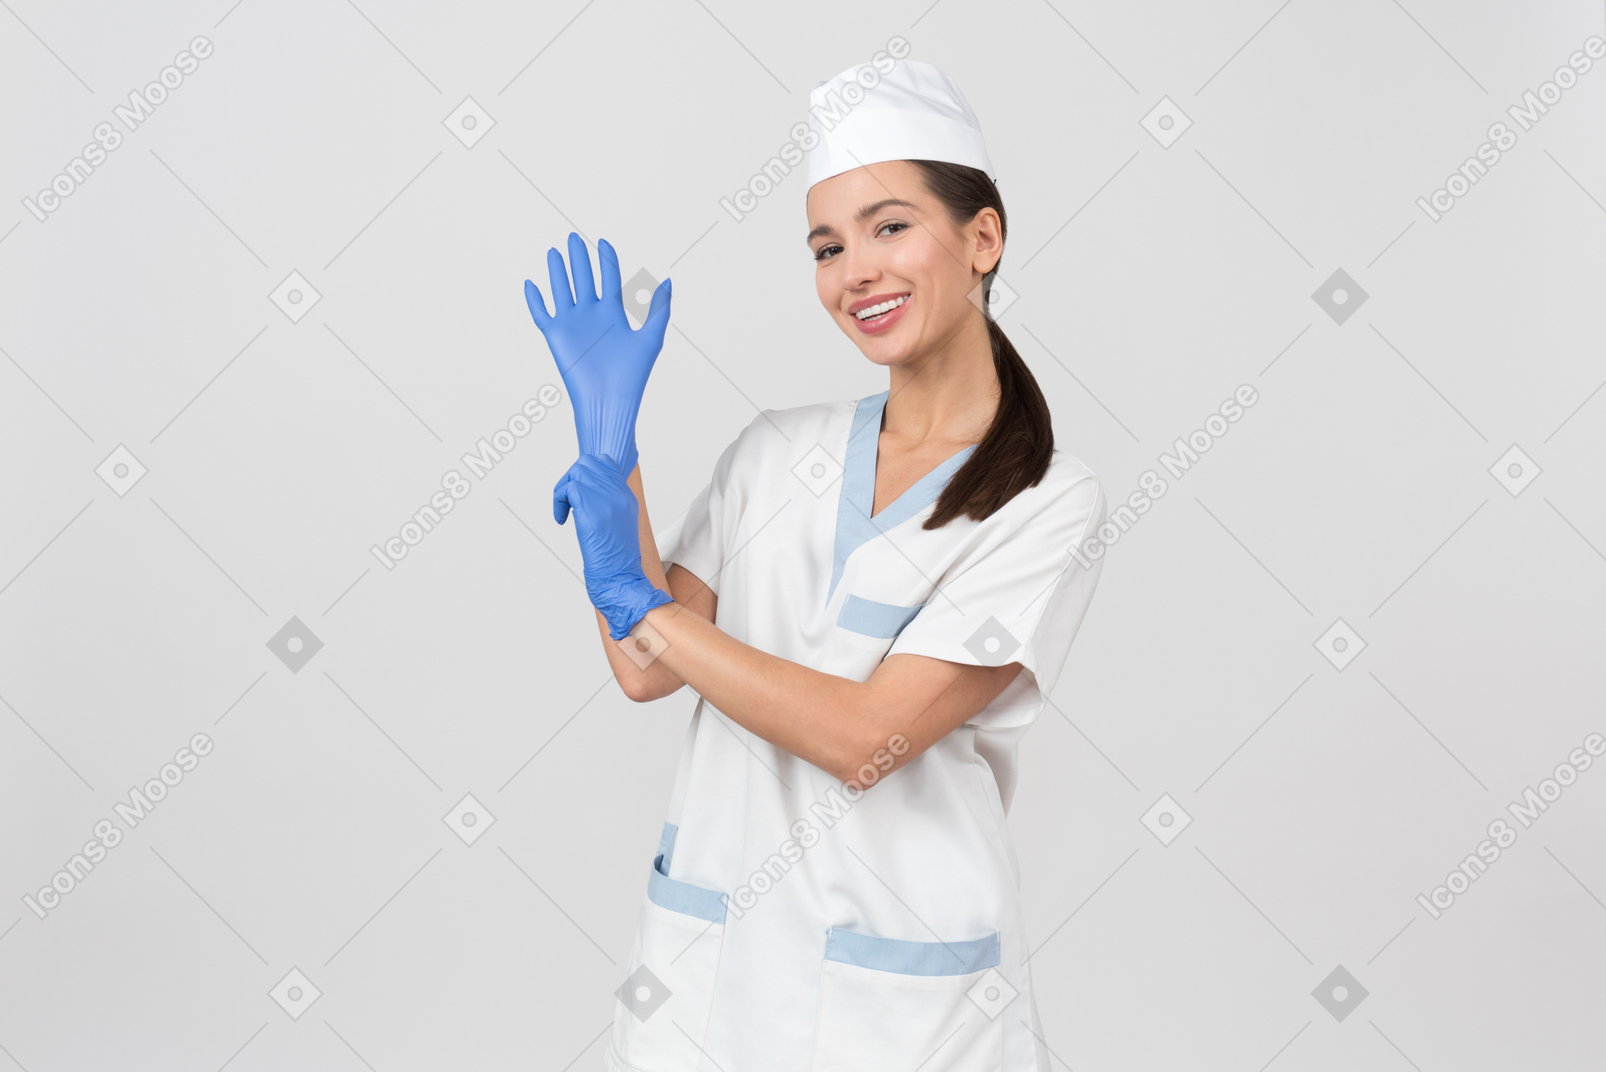 Attractive nurse in a medical robe putting on a latex glove